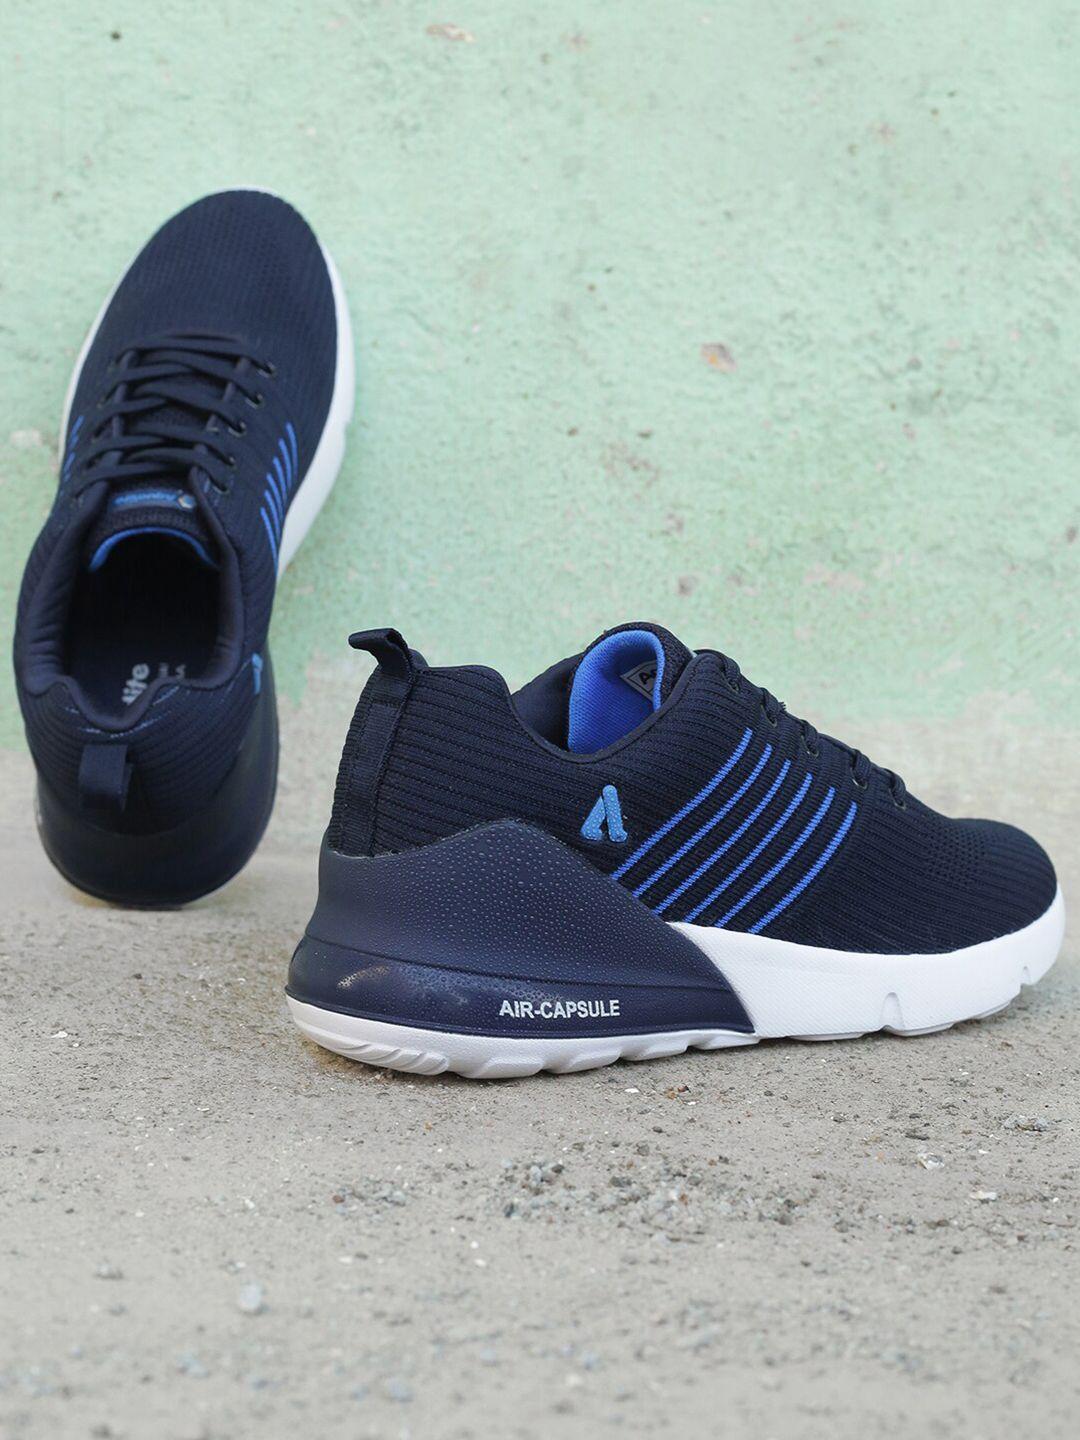 aqualite-men-blue-mesh-walking-non-marking-sports-shoes-with-air-technology